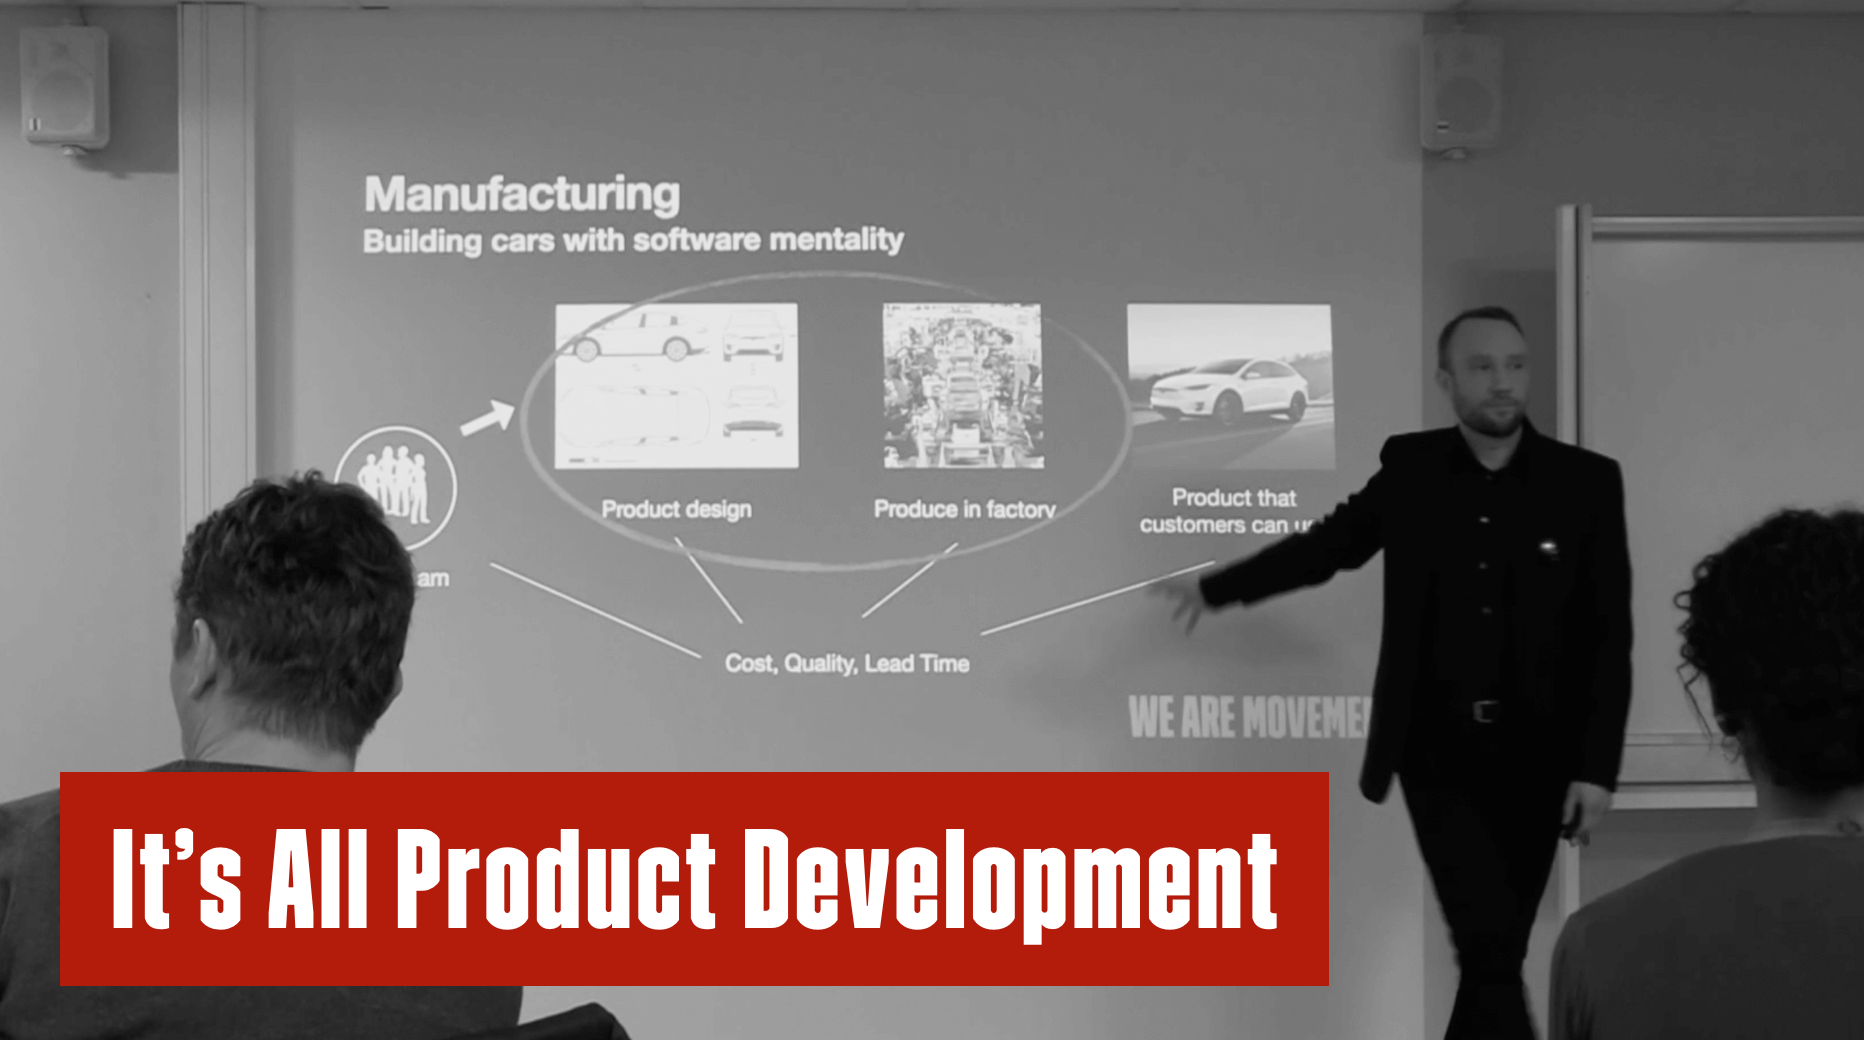 It’s All Product Development – How you build your team, pipeline and factory matters